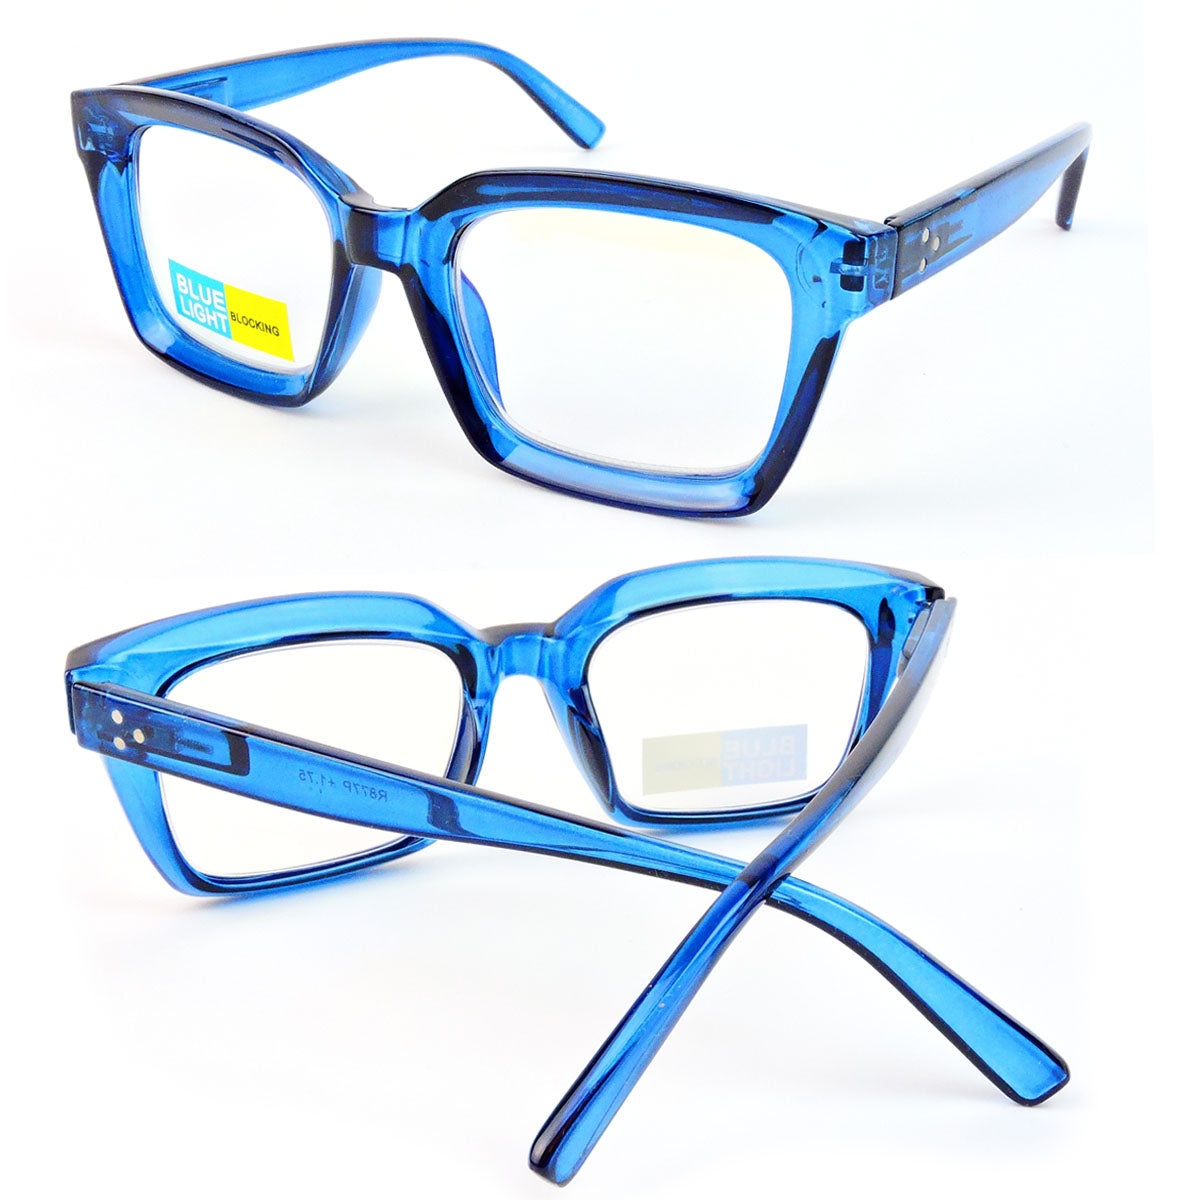 Blue Light Blocking Glasses Thick Rectangle Preppy Look - Reading Glasses - Leopard, +1.50